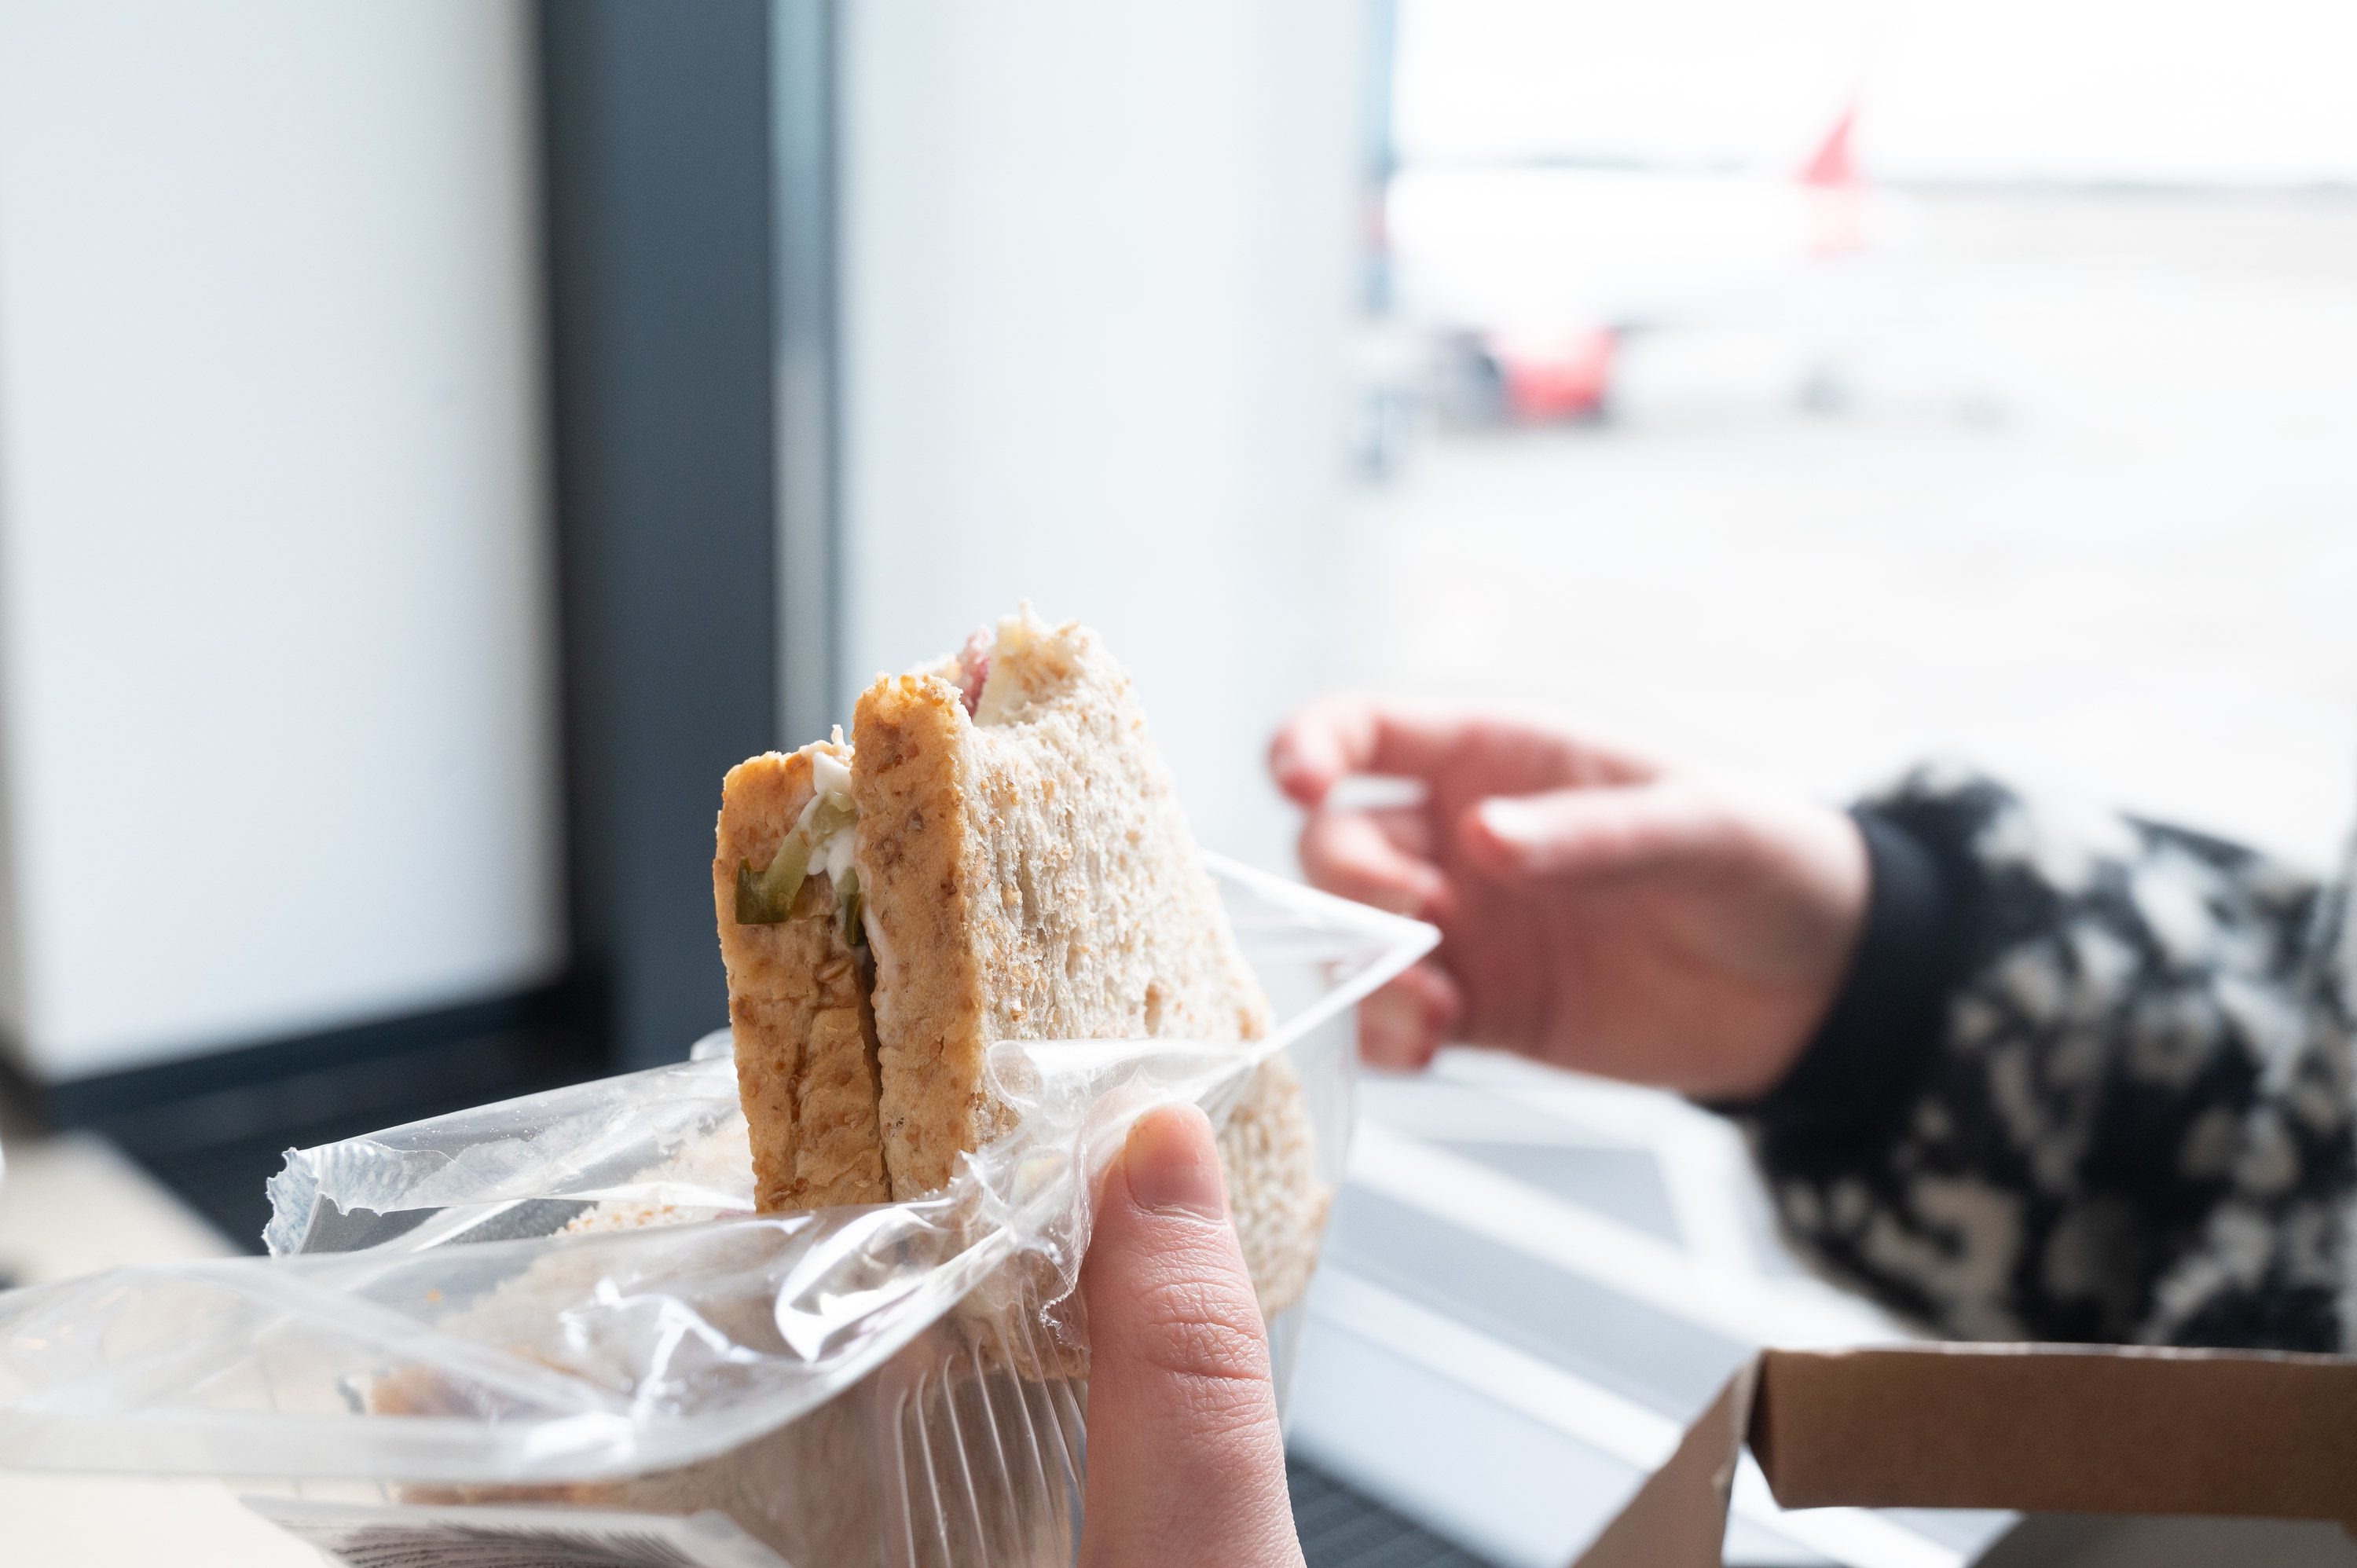 A packed sandwich for a flight